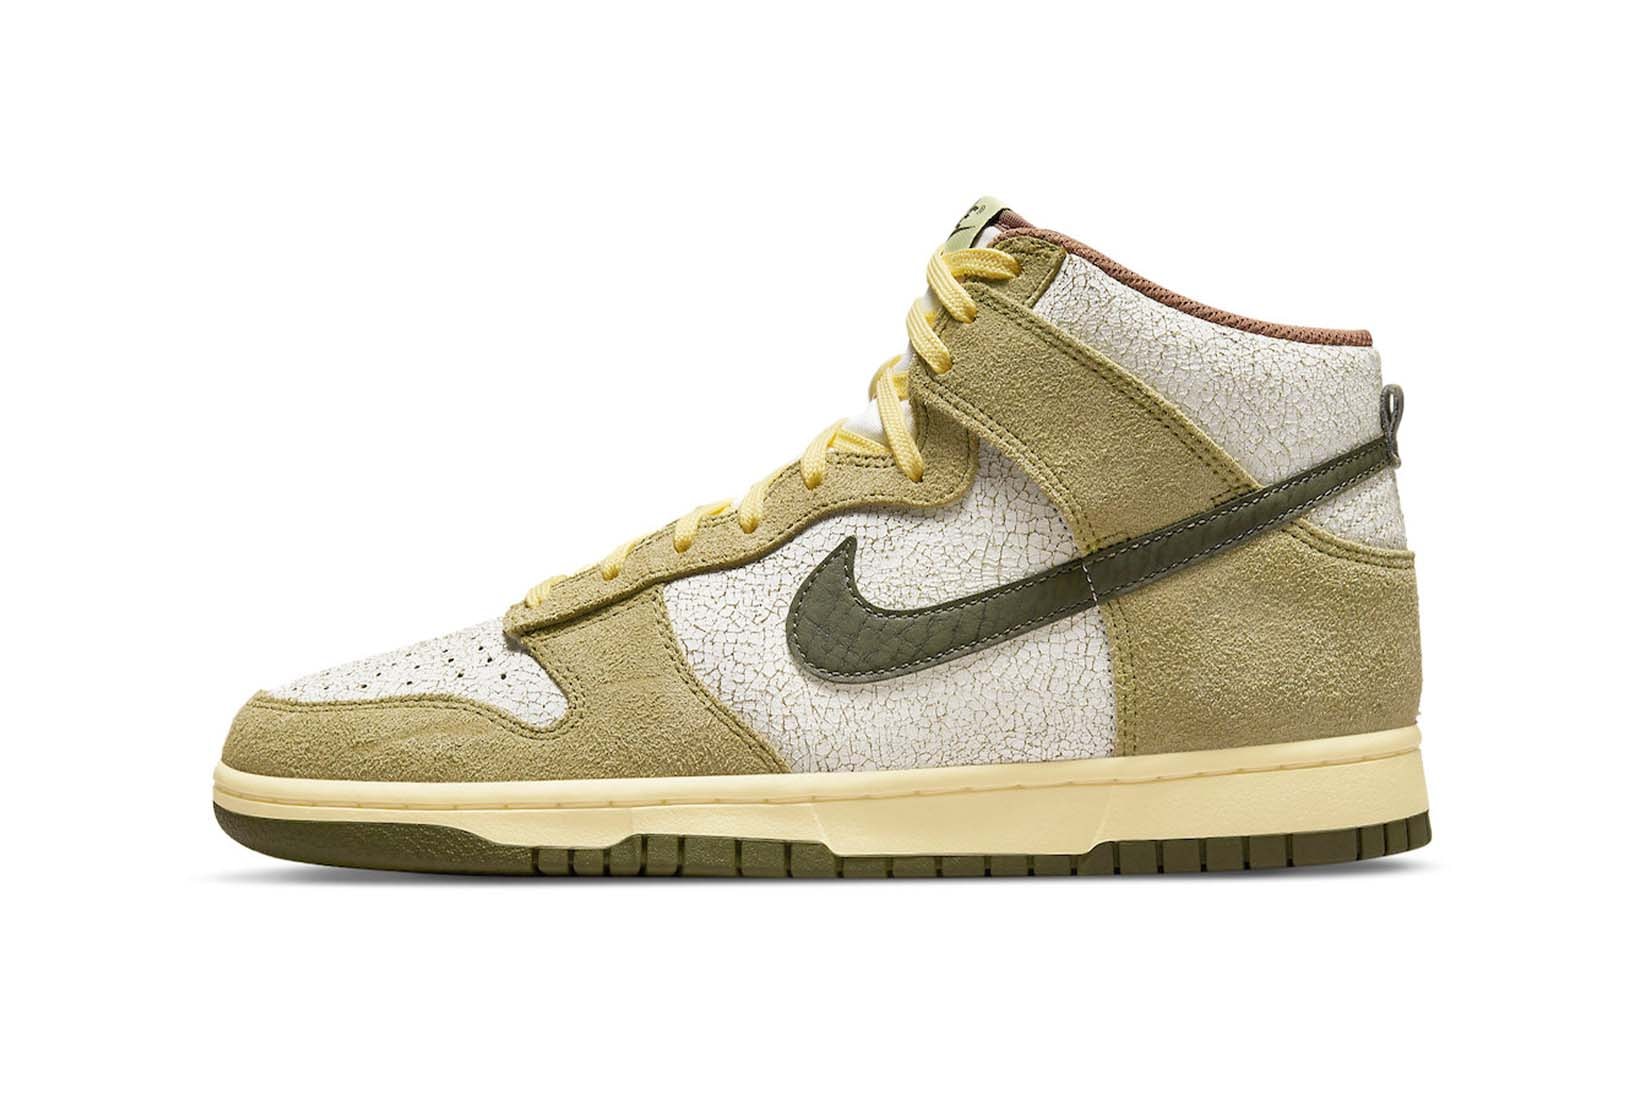 Nike Dunk High Re-Raw Coriander Summit White Cracked Leather Price Release Date